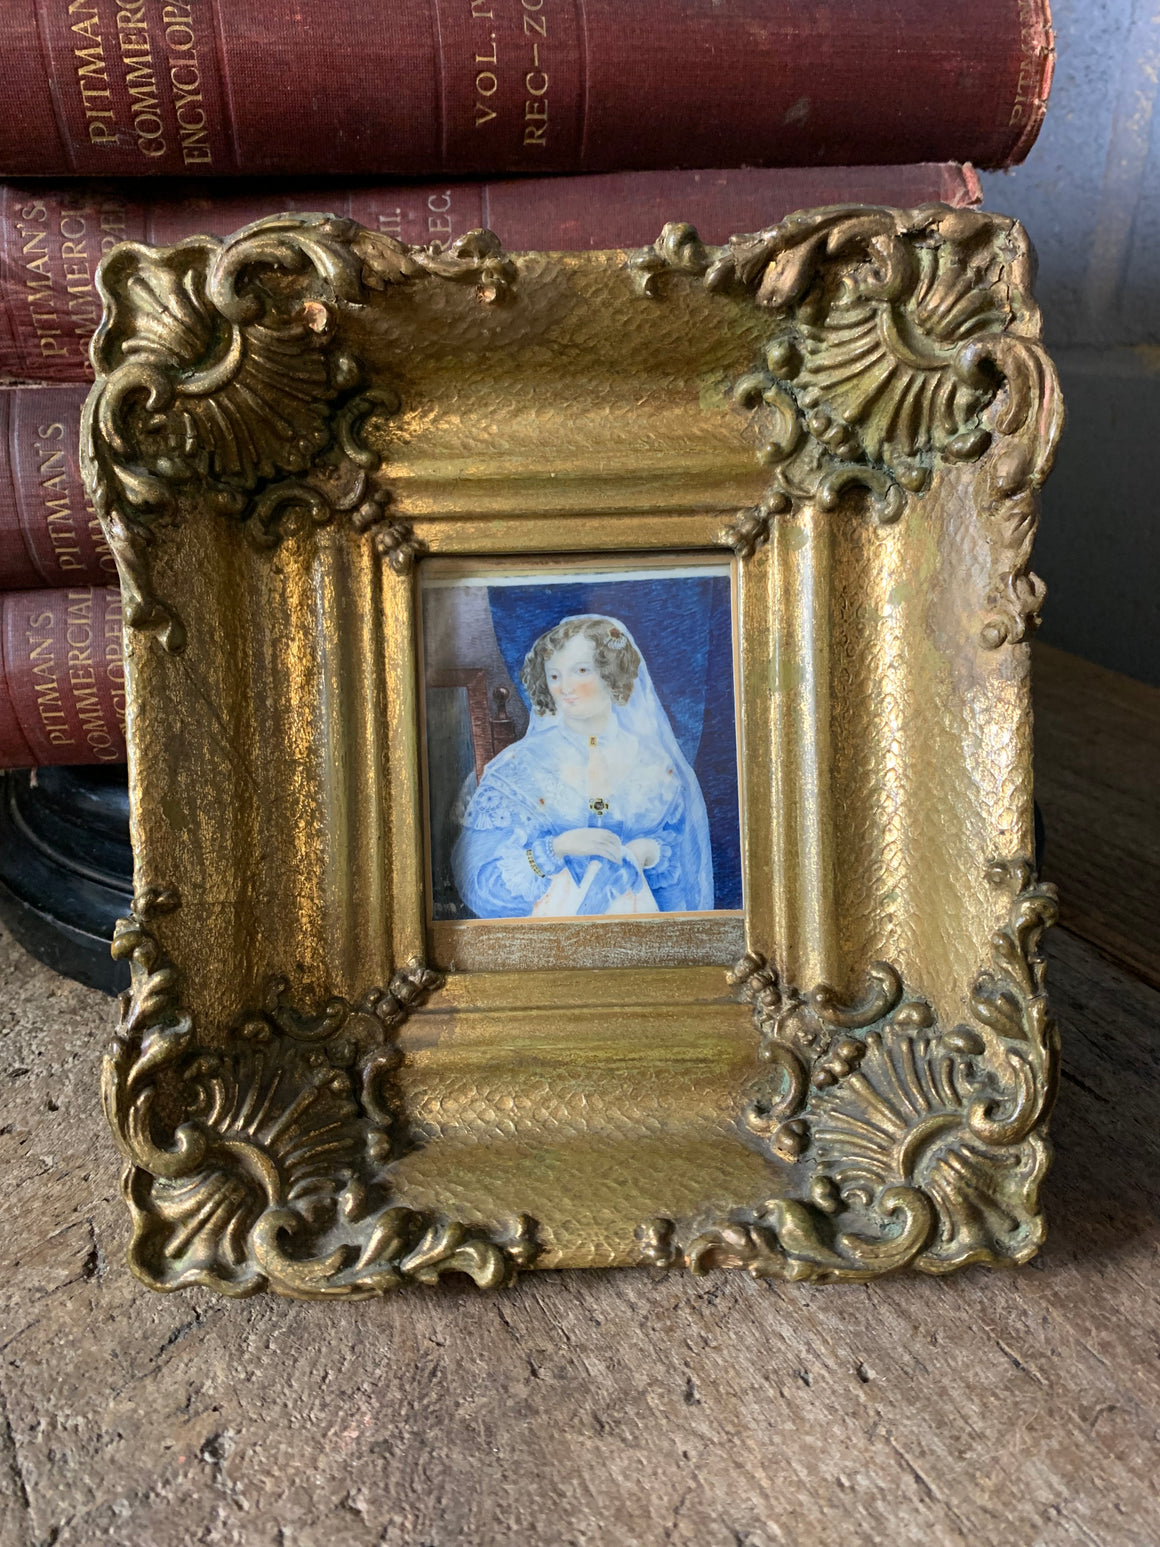 A framed miniature of a woman in blue ~ front view